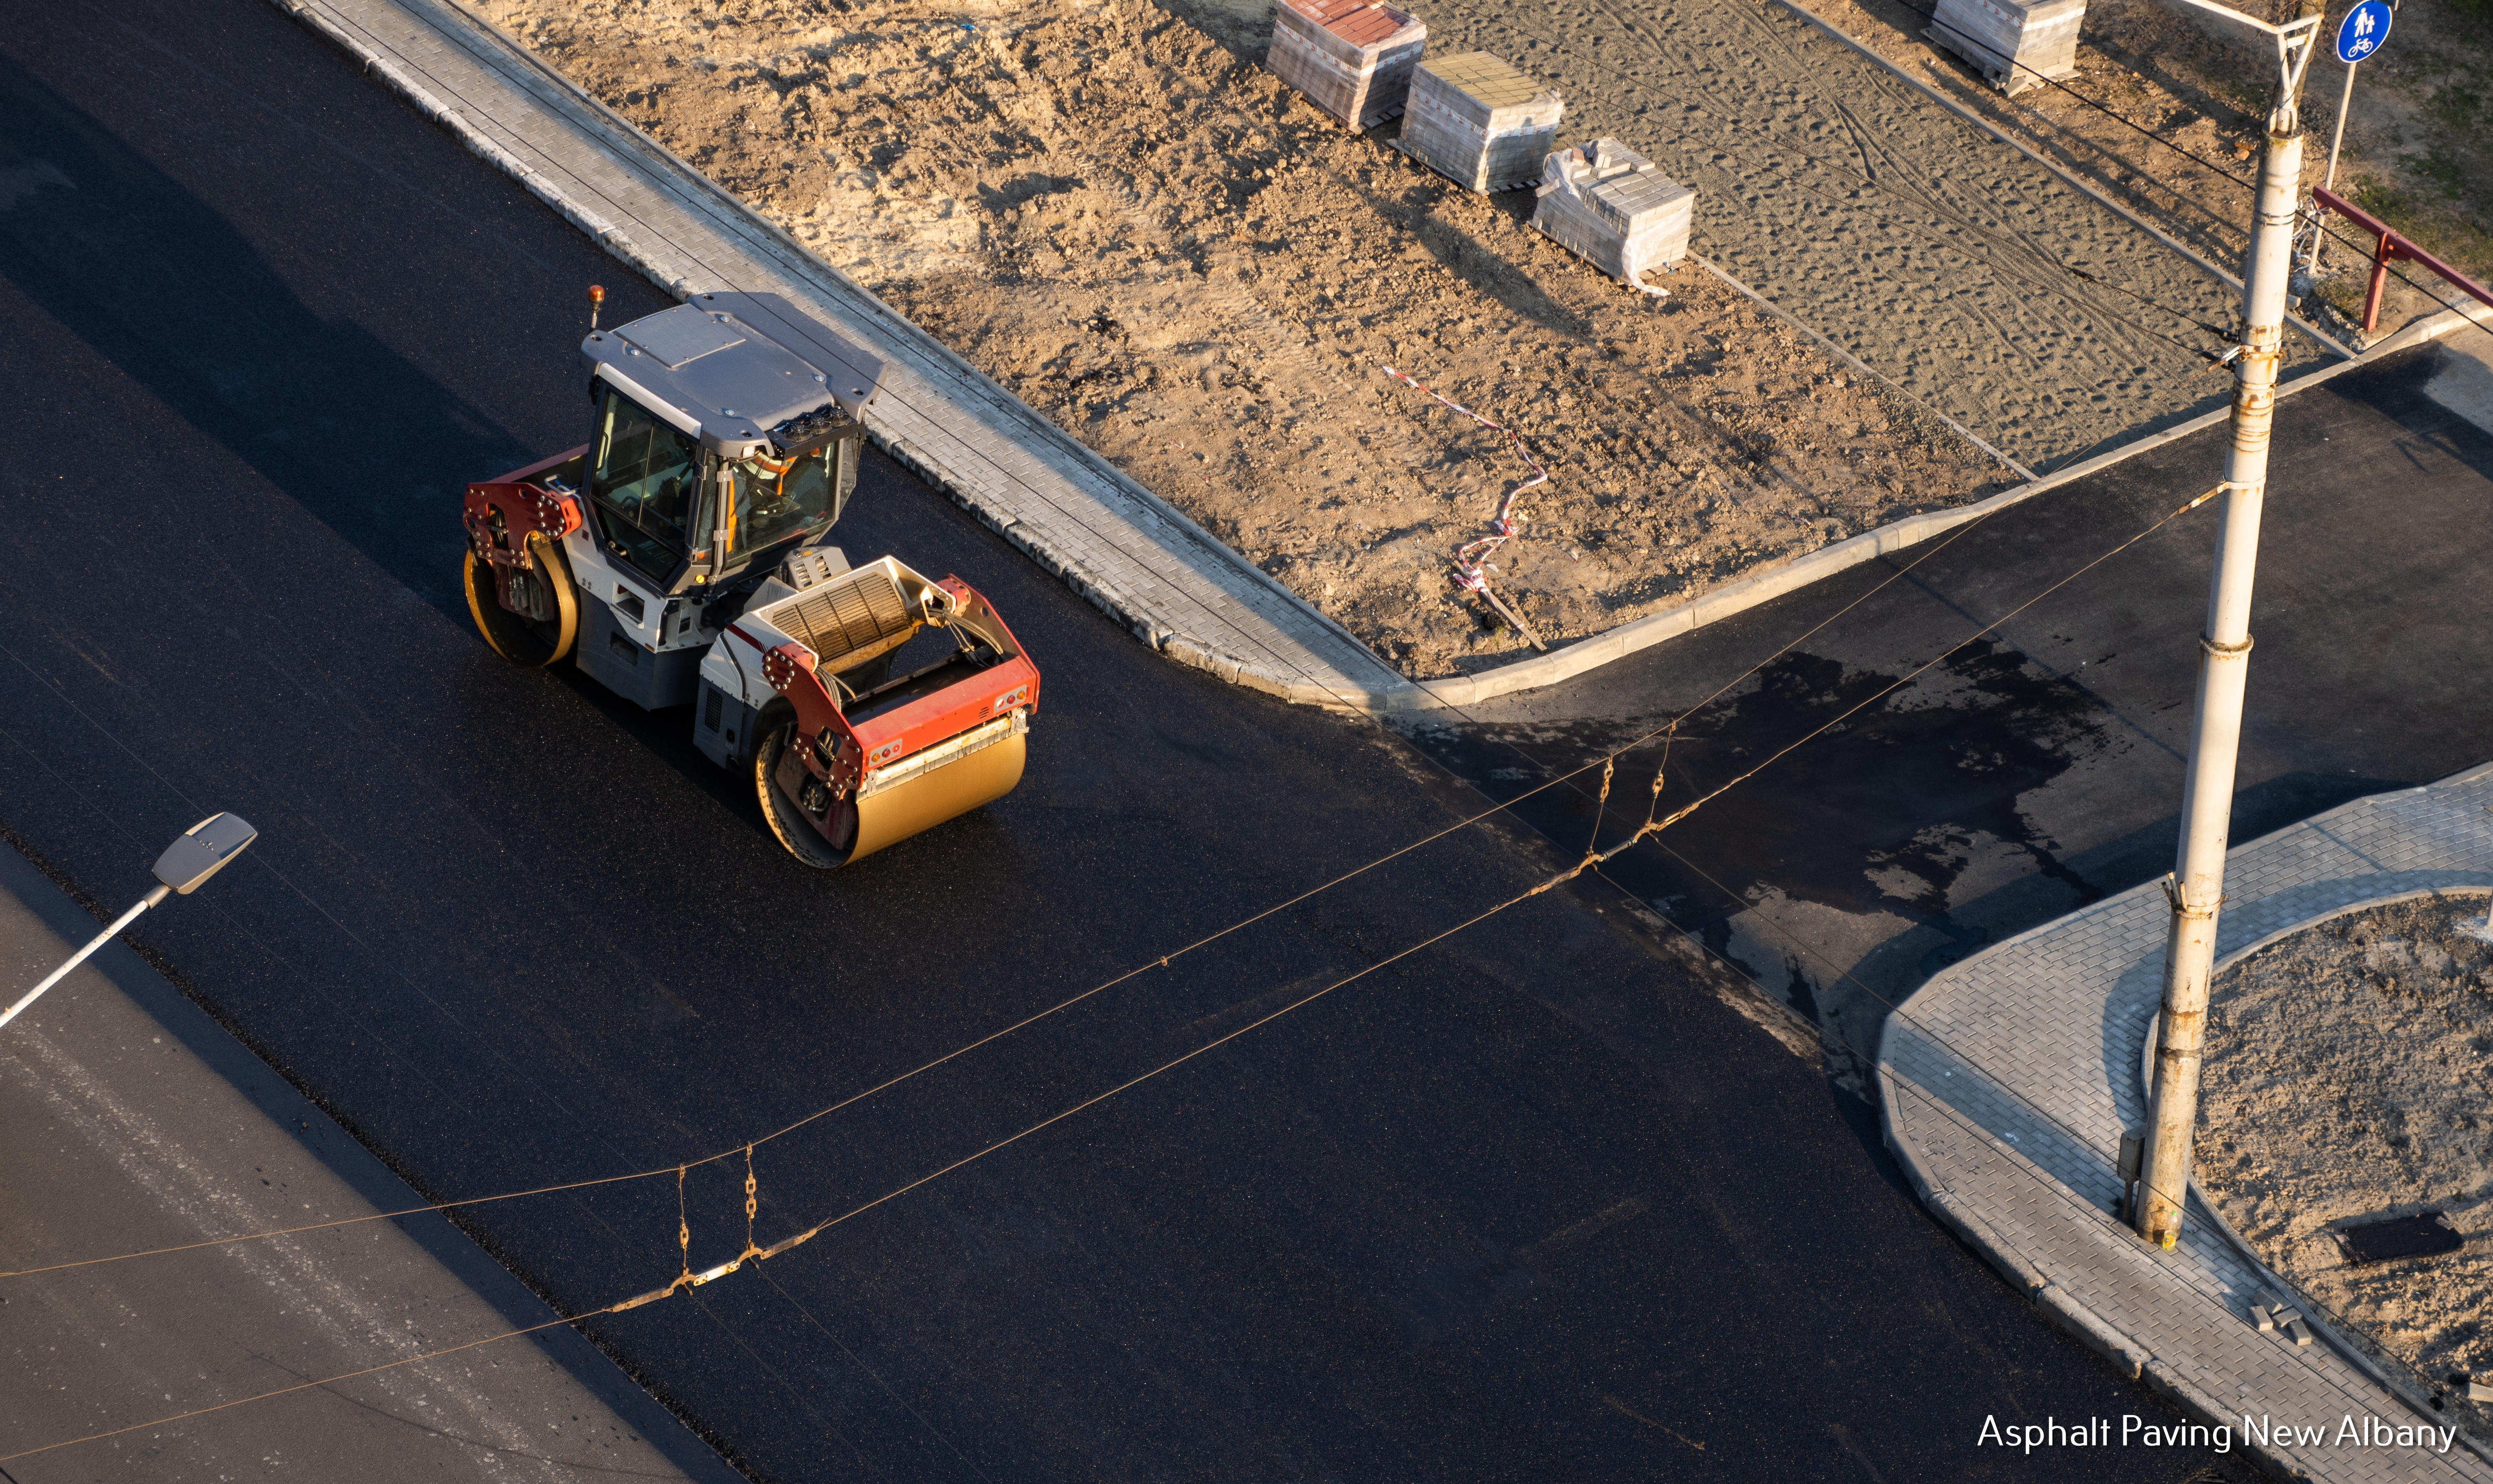 Southern Indiana Asphalt Paving Outlines Why Clients Should Choose Them